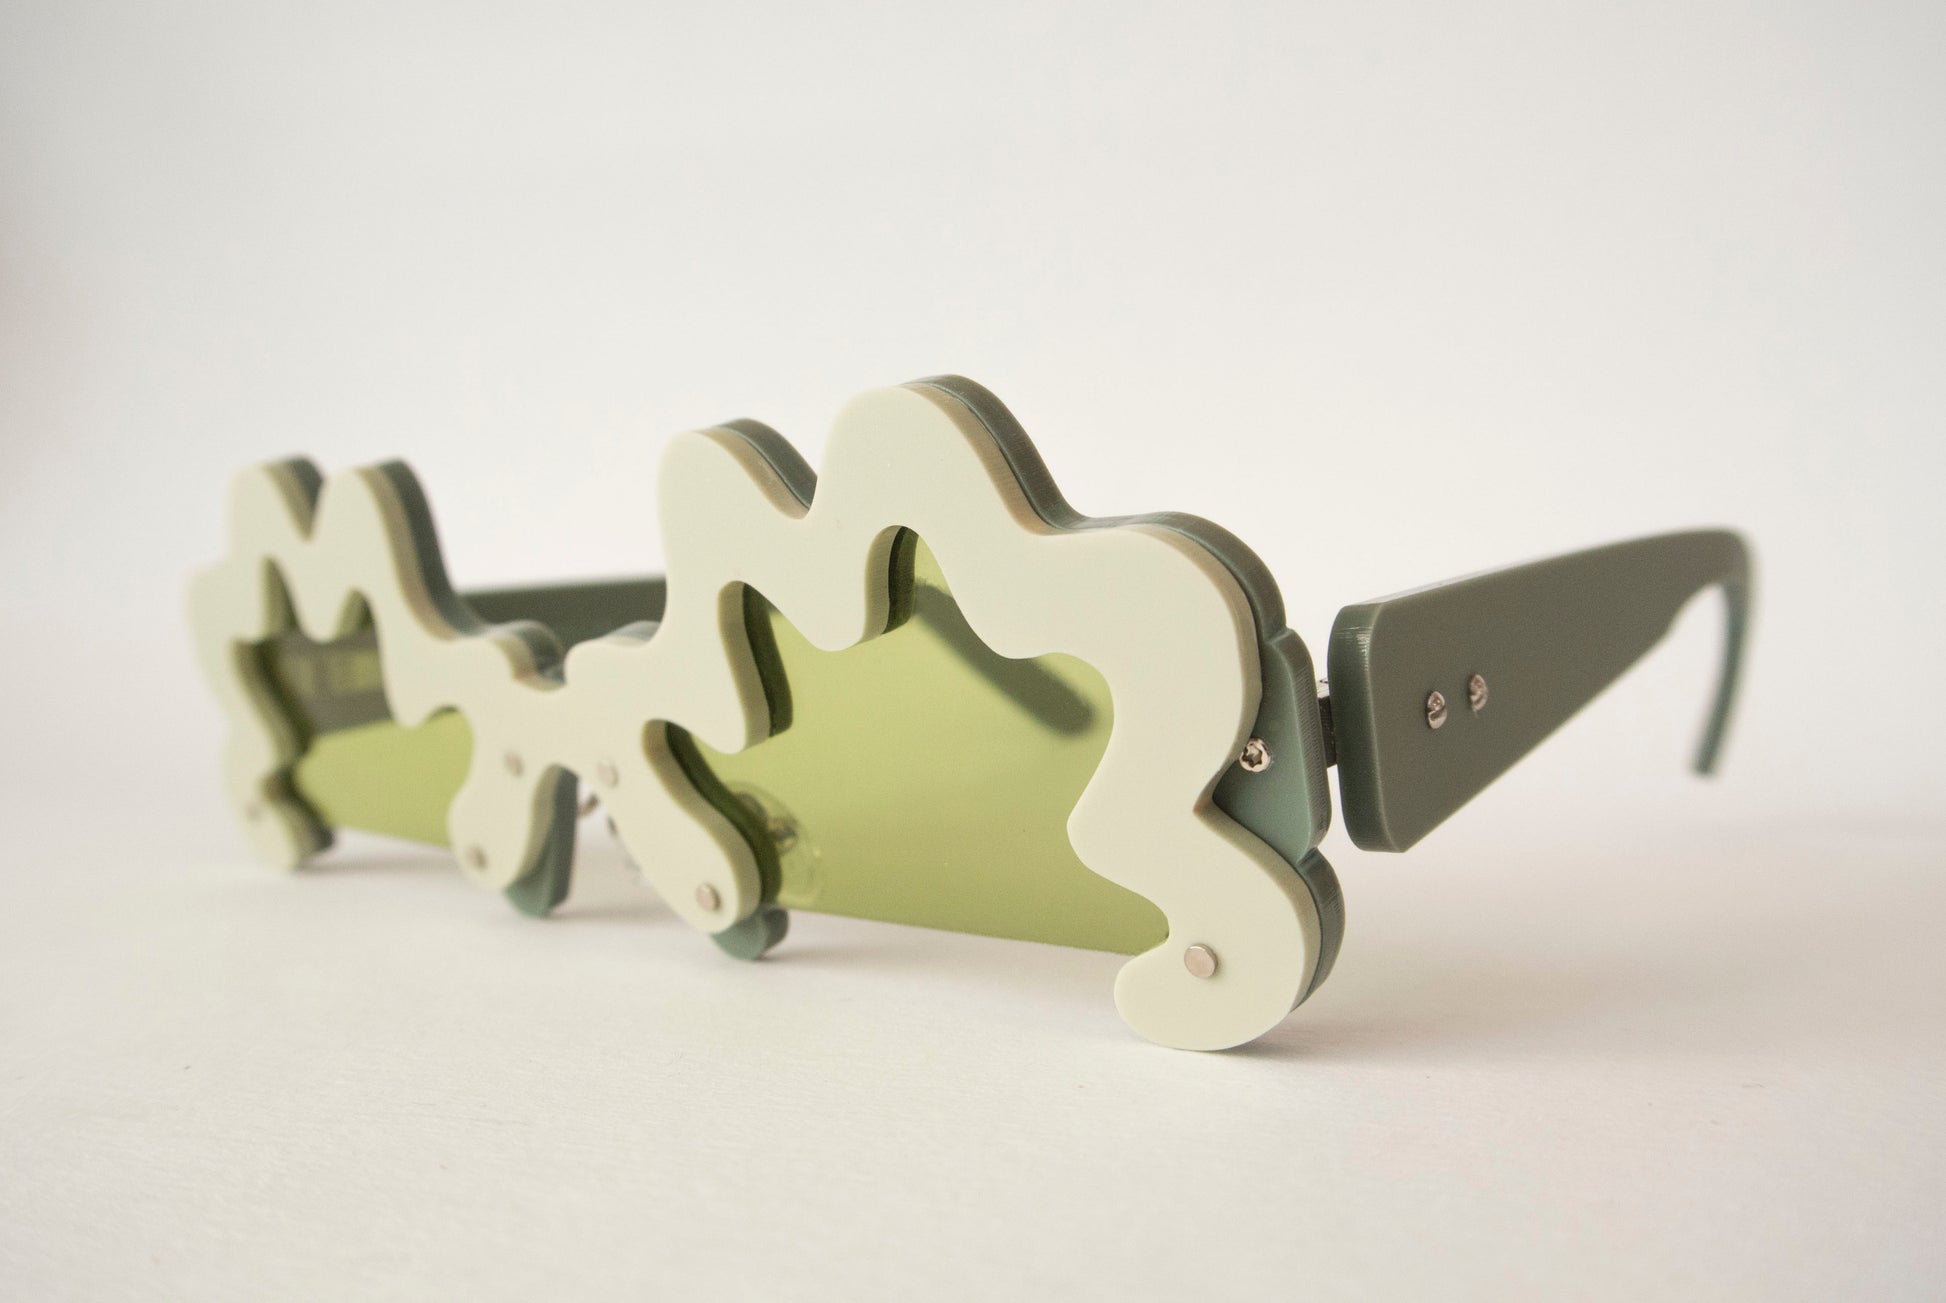 wiggle rimmed glasses in khaki and green by anna mulhearn for animalhair